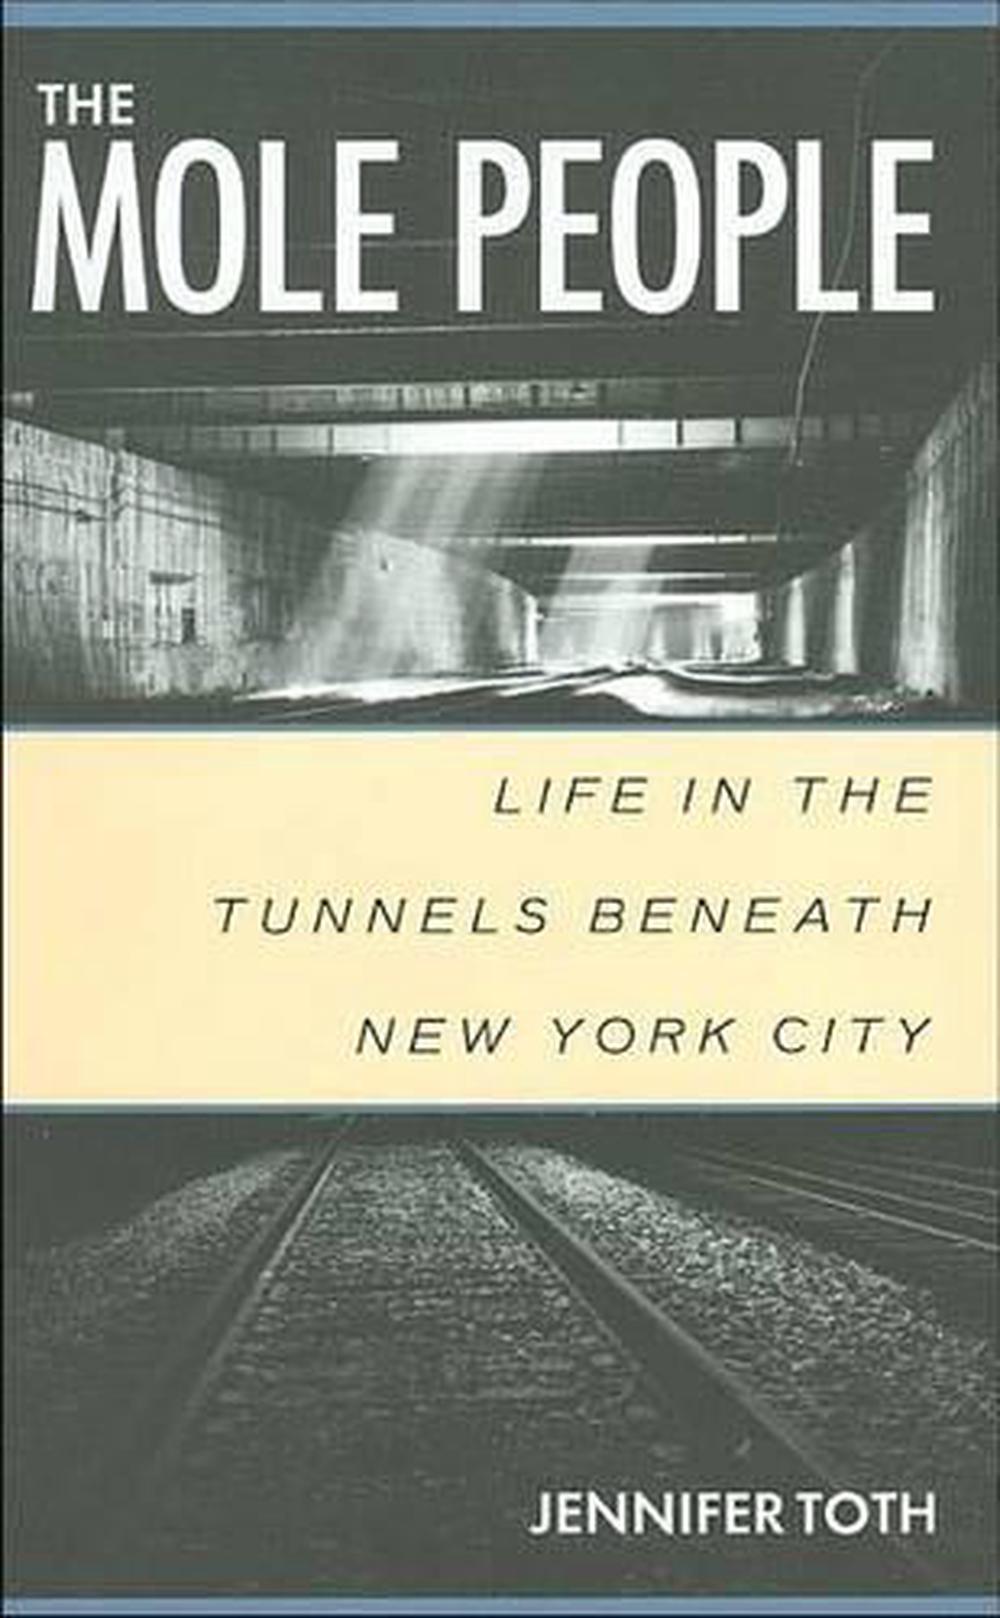 The Mole People Life in the Tunnels Beneath New York City by Jennifer Toth (Eng 9781556522413